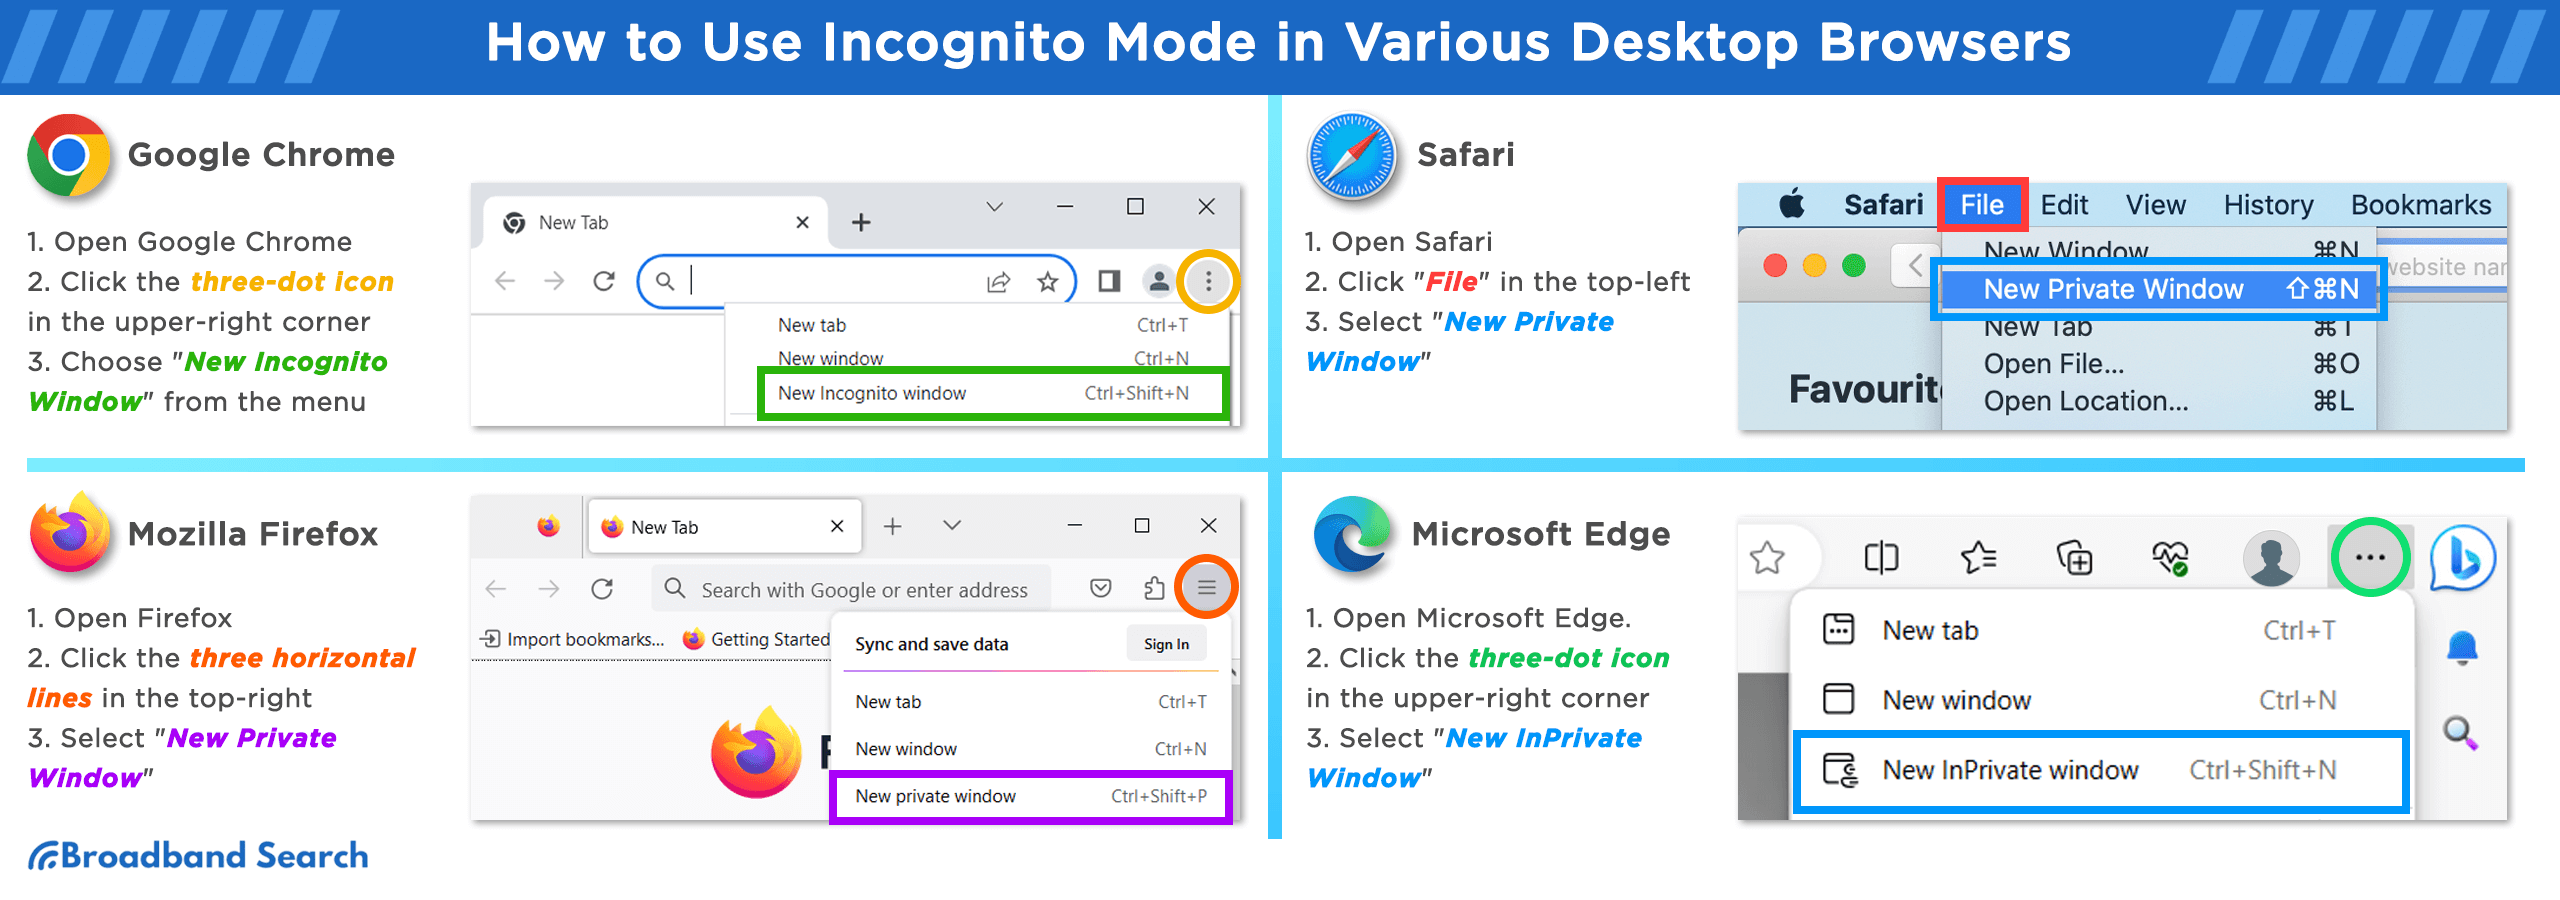 How to use incognito mode in various desktop browsers